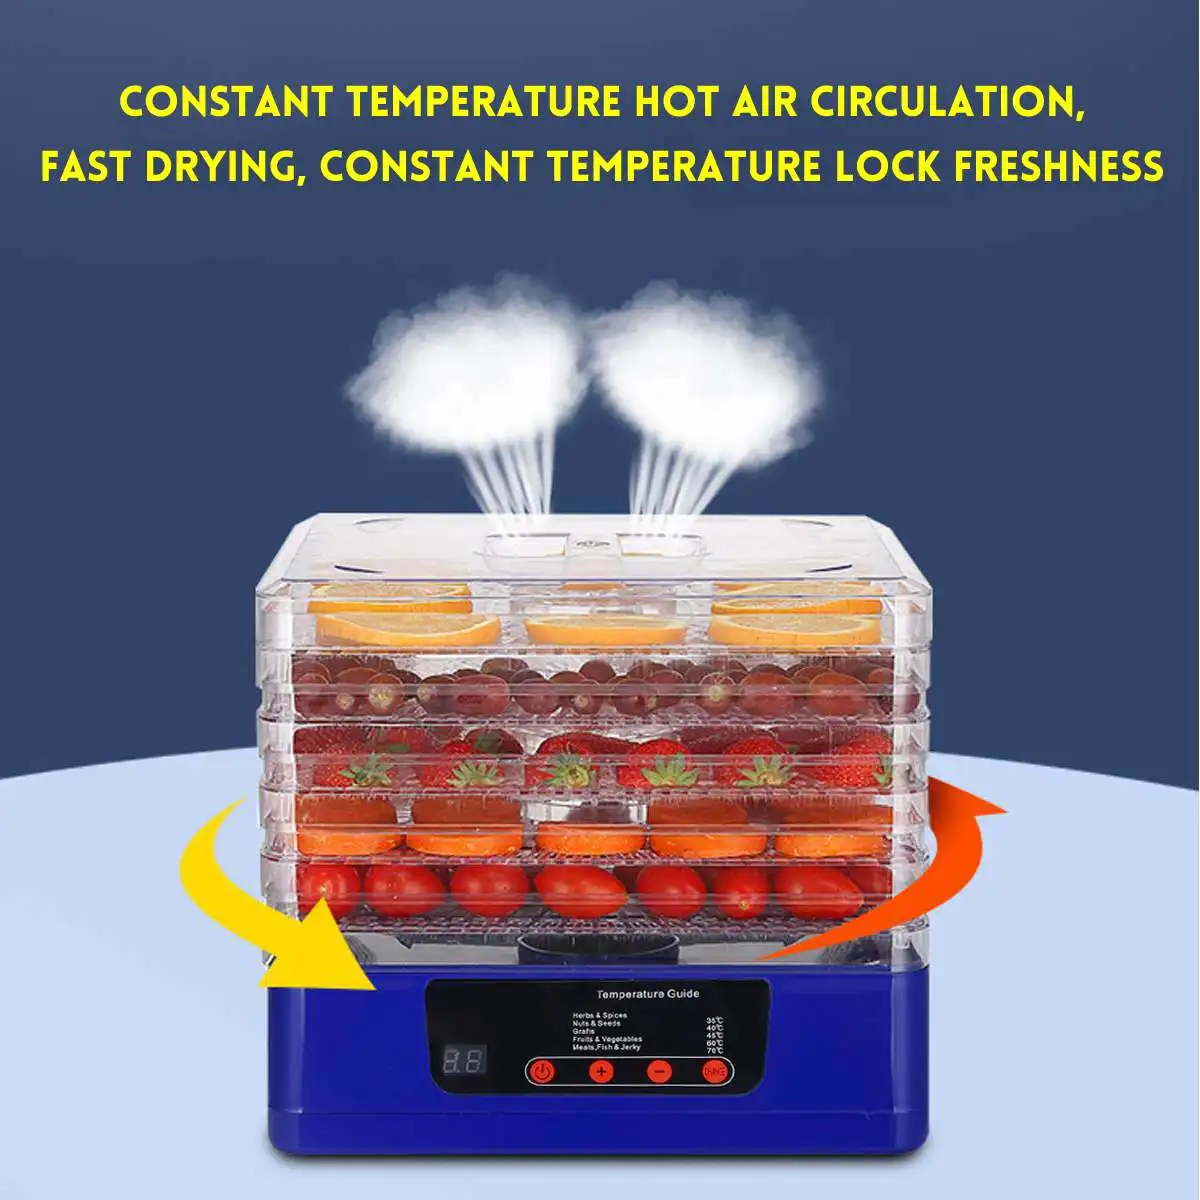 

5 Layer Food Dryer Household Smart Fruits Dehydrator With Digital Timer Temperature Control For Fruit,Vegetable,Meat Jerky,Herbs